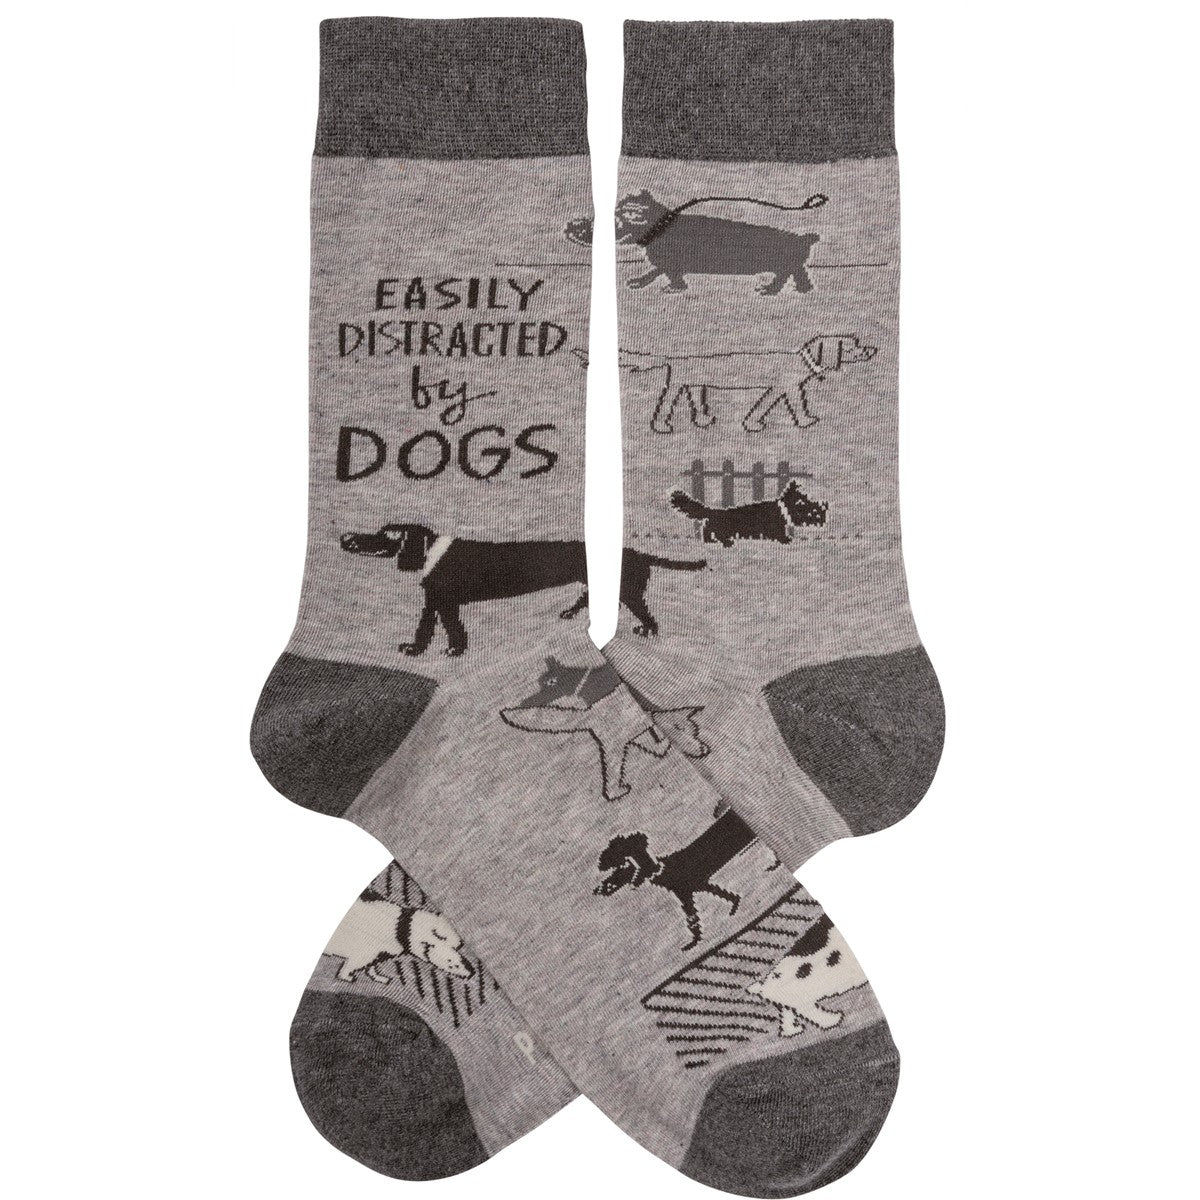 DISTRACTED BY DOGS SOCKS